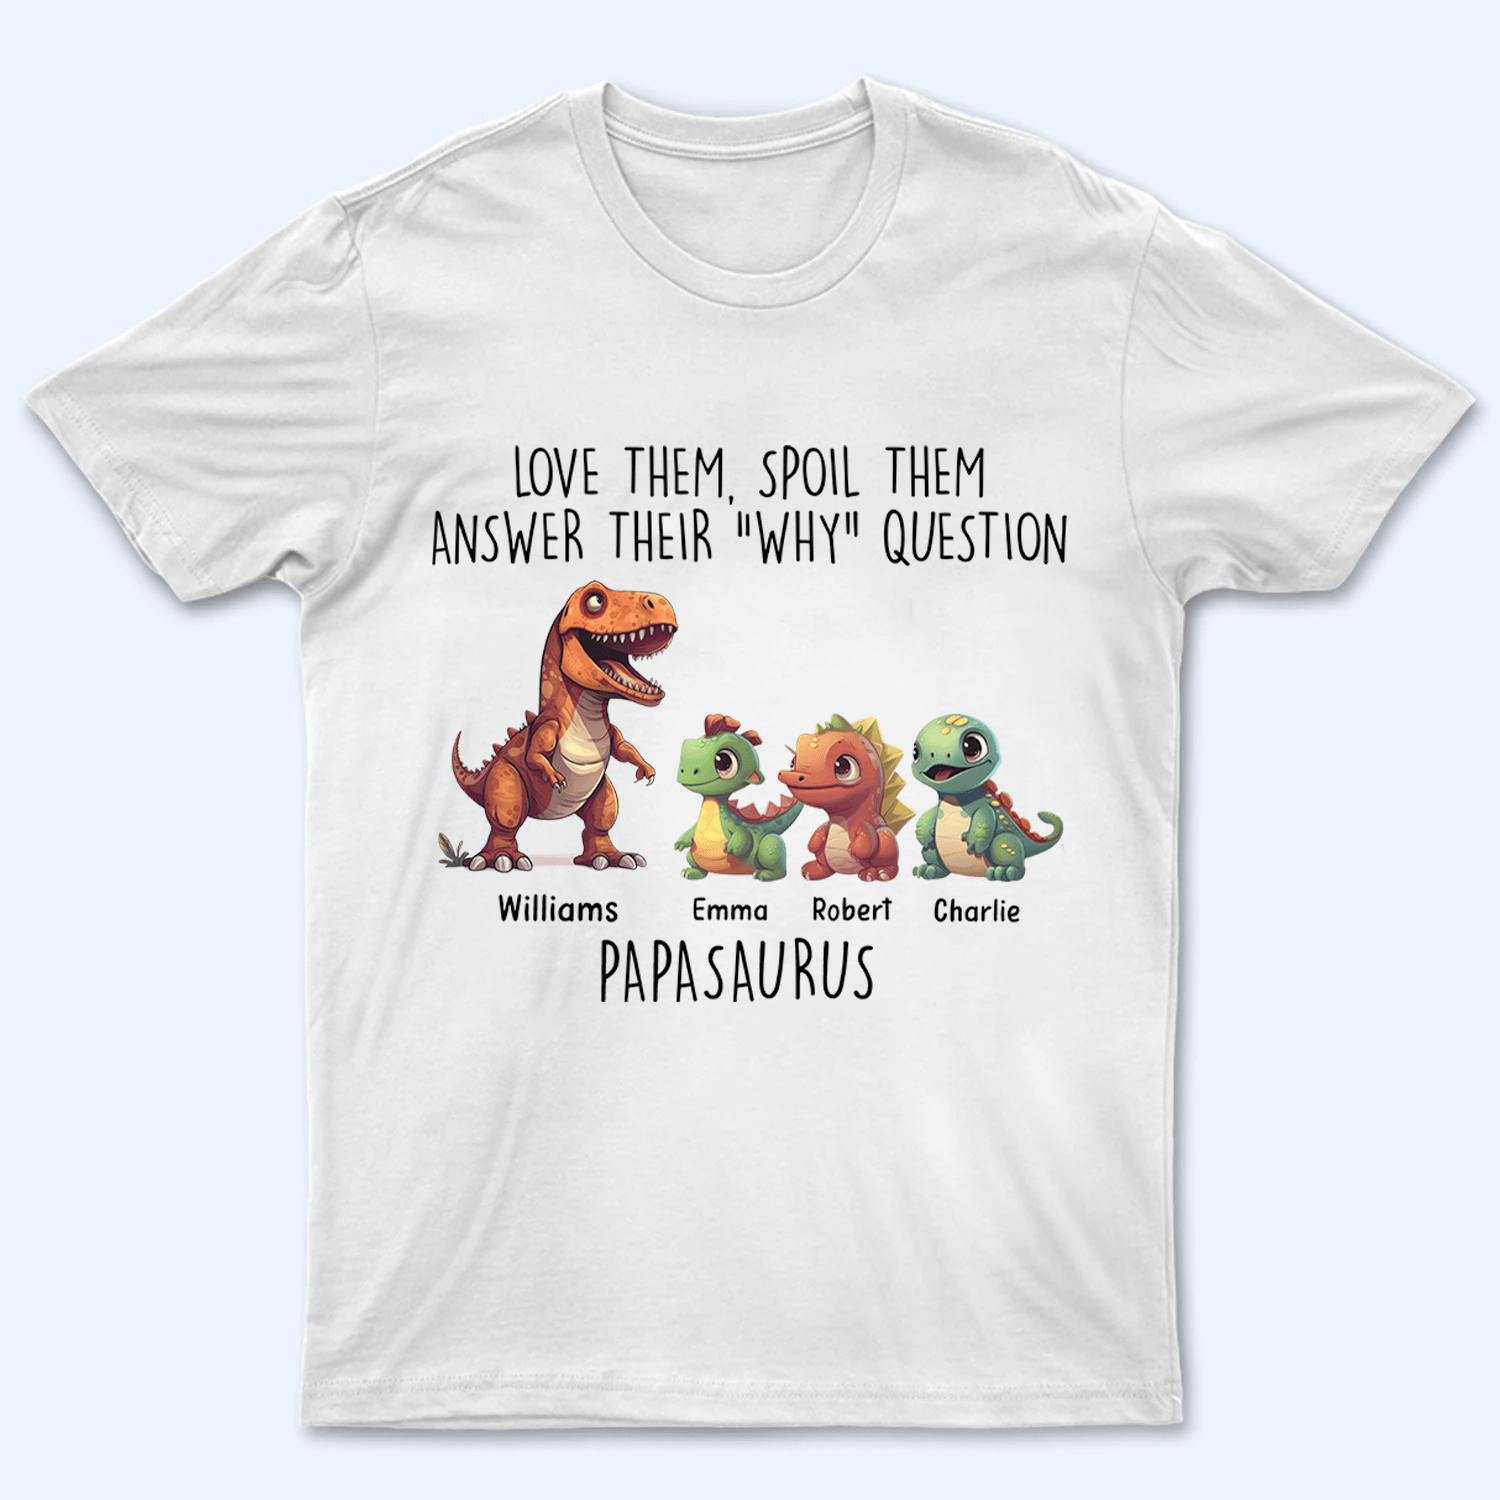 Love Them, Spoil Them Papasaurus - Personalized Custom T Shirt - Father's Day Gift for Dad, Papa, Grandpa, Daddy, Dada - Suzitee Store